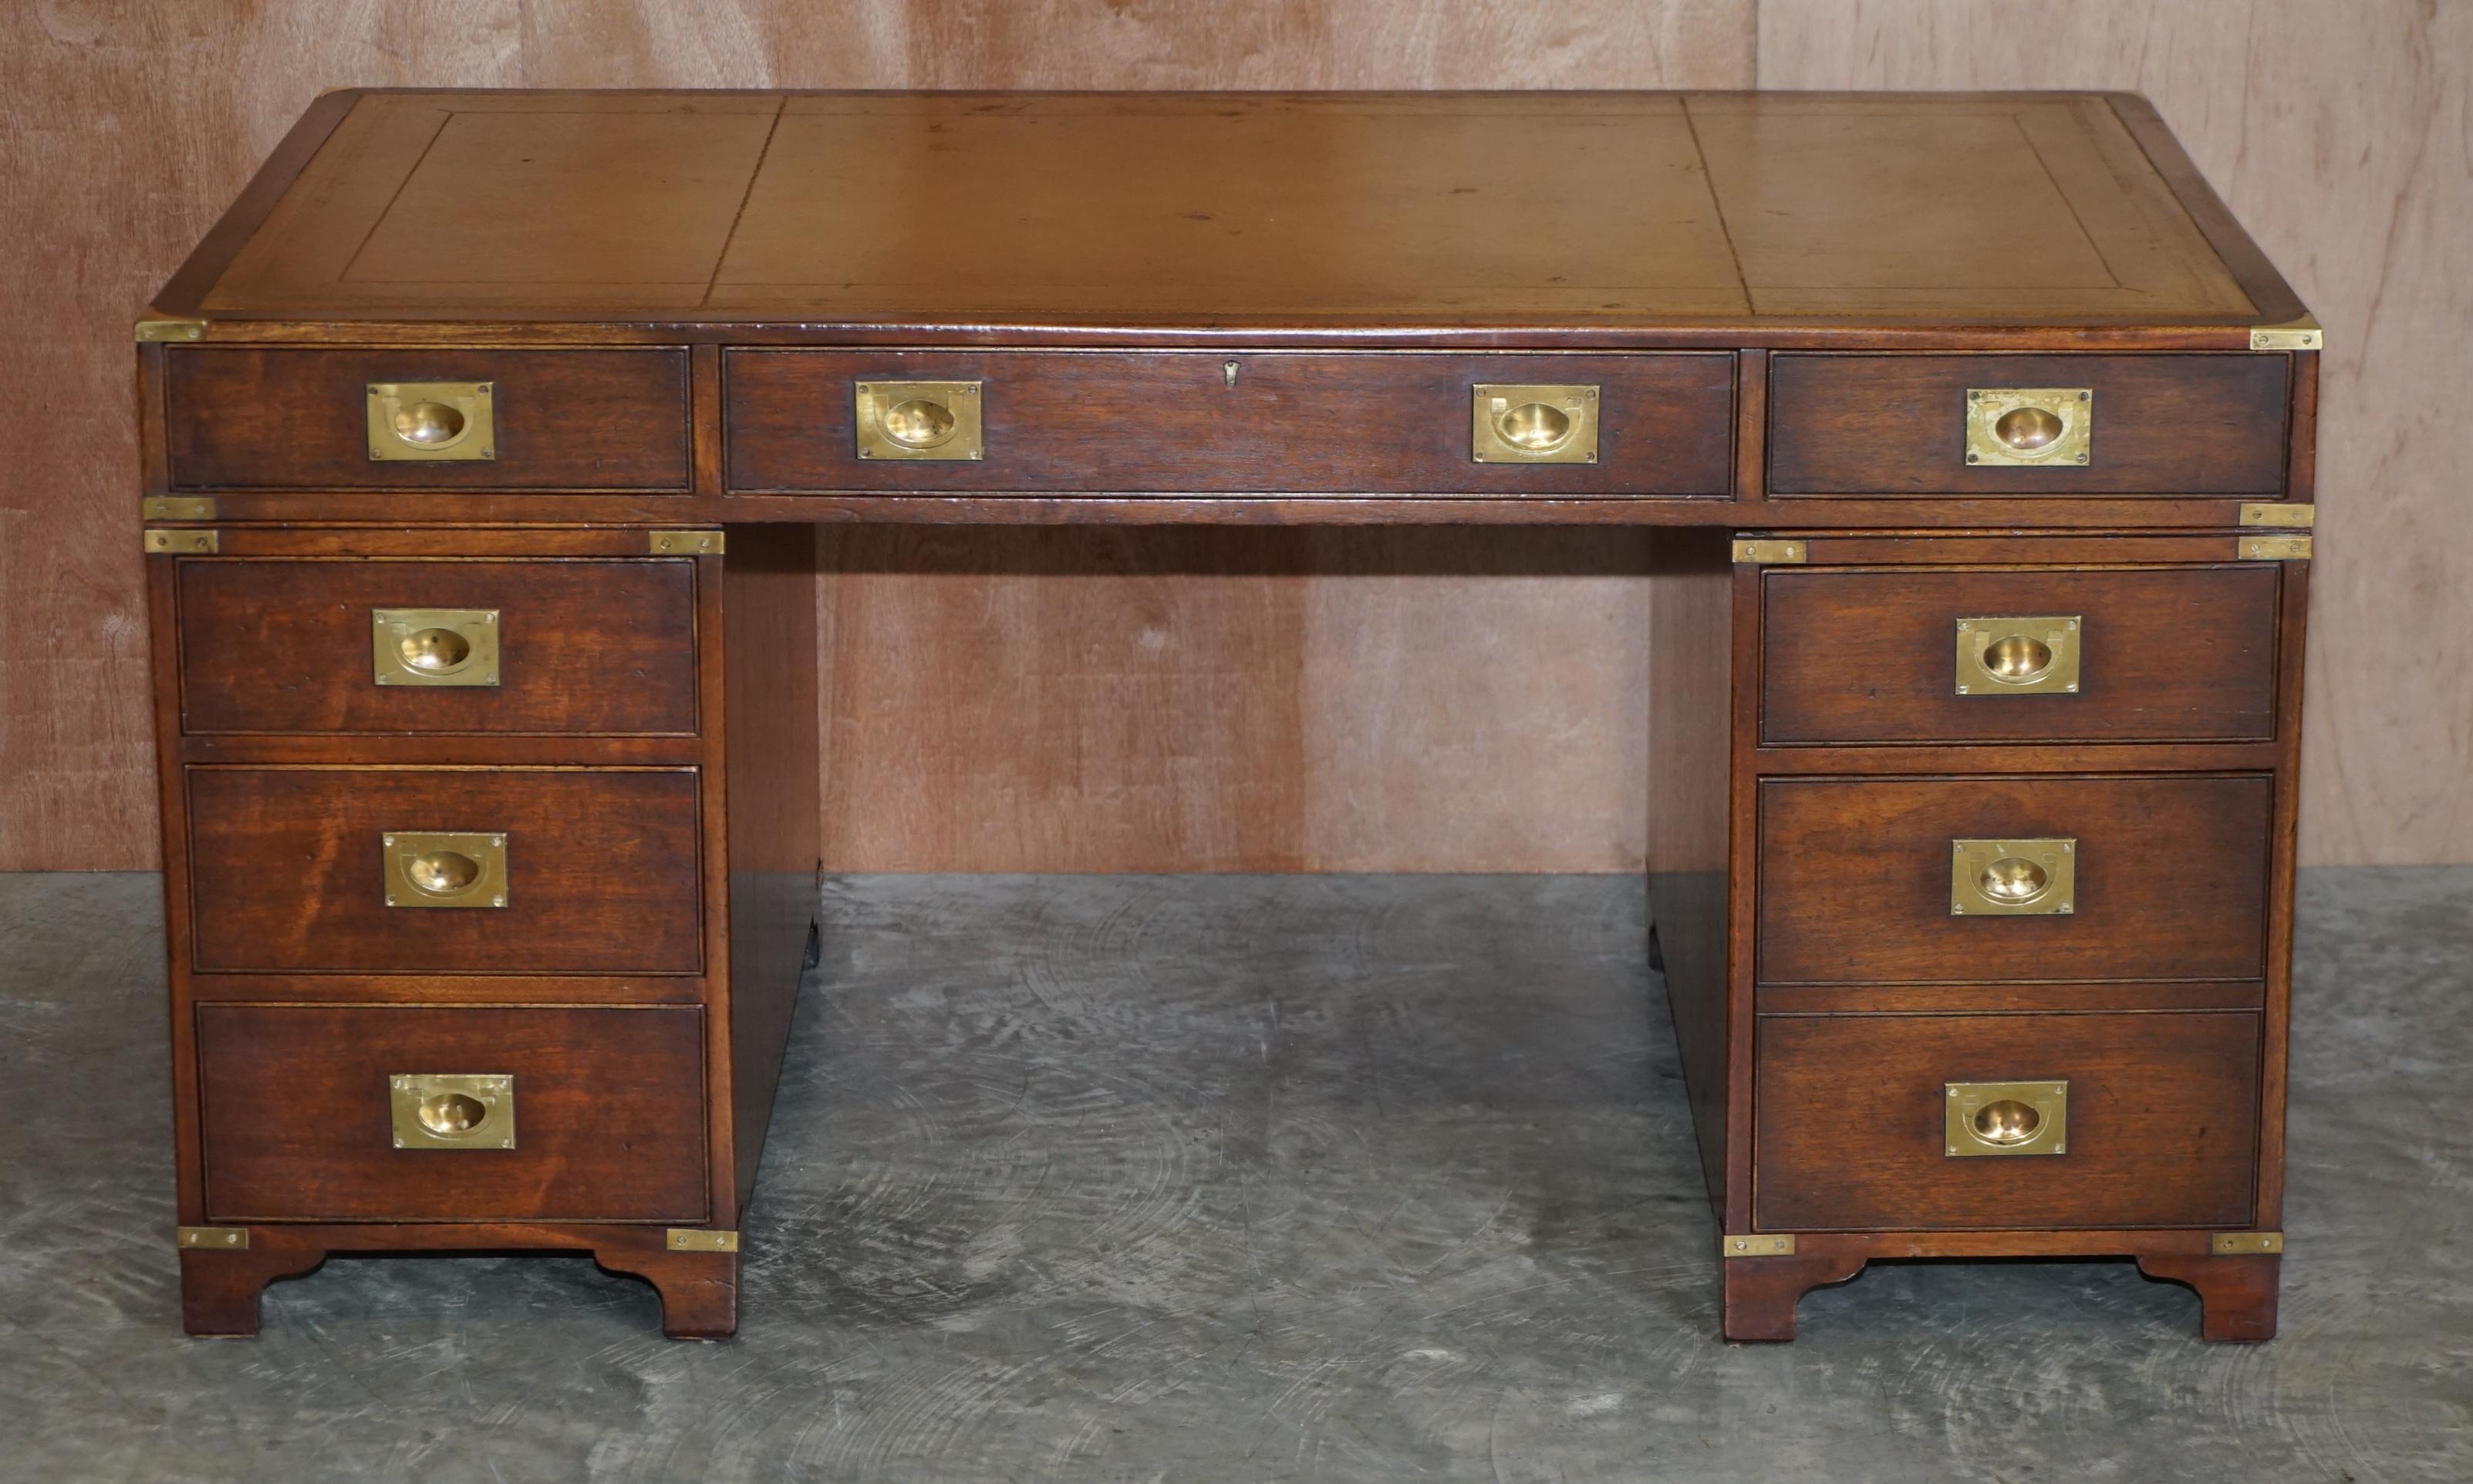 We are delighted to offer for sale this lovely hand made in England Harrods Kennedy Military Campaign twin pedestal double sided partner desk with bookcase back and brown leather writing surface

This desk is an original twin pedestal partner desk